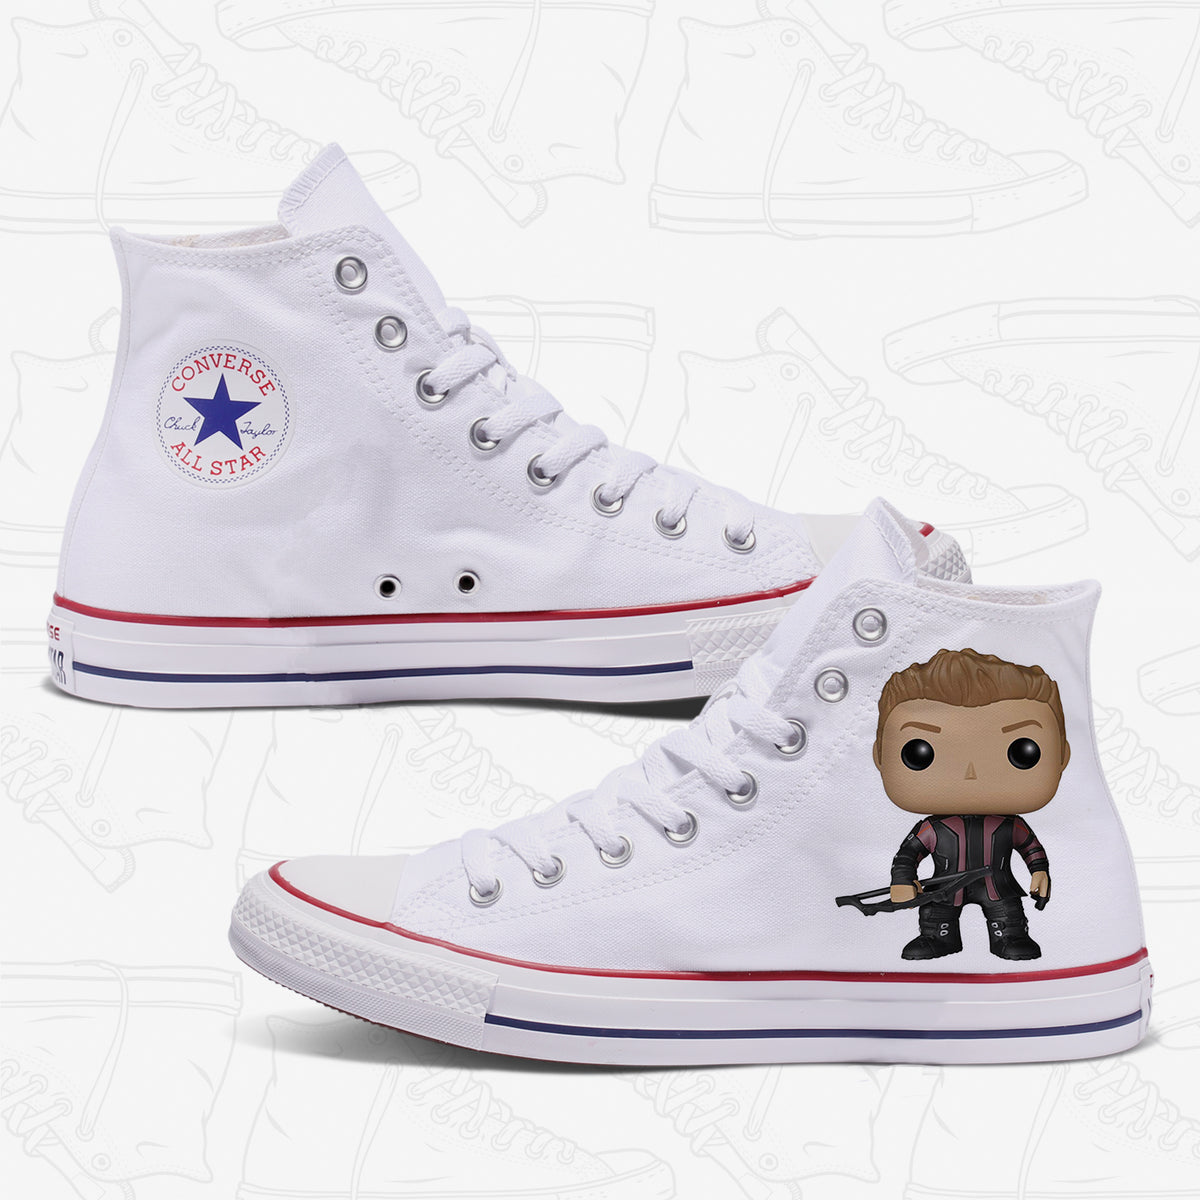 Hawkeye Adult Converse Shoes